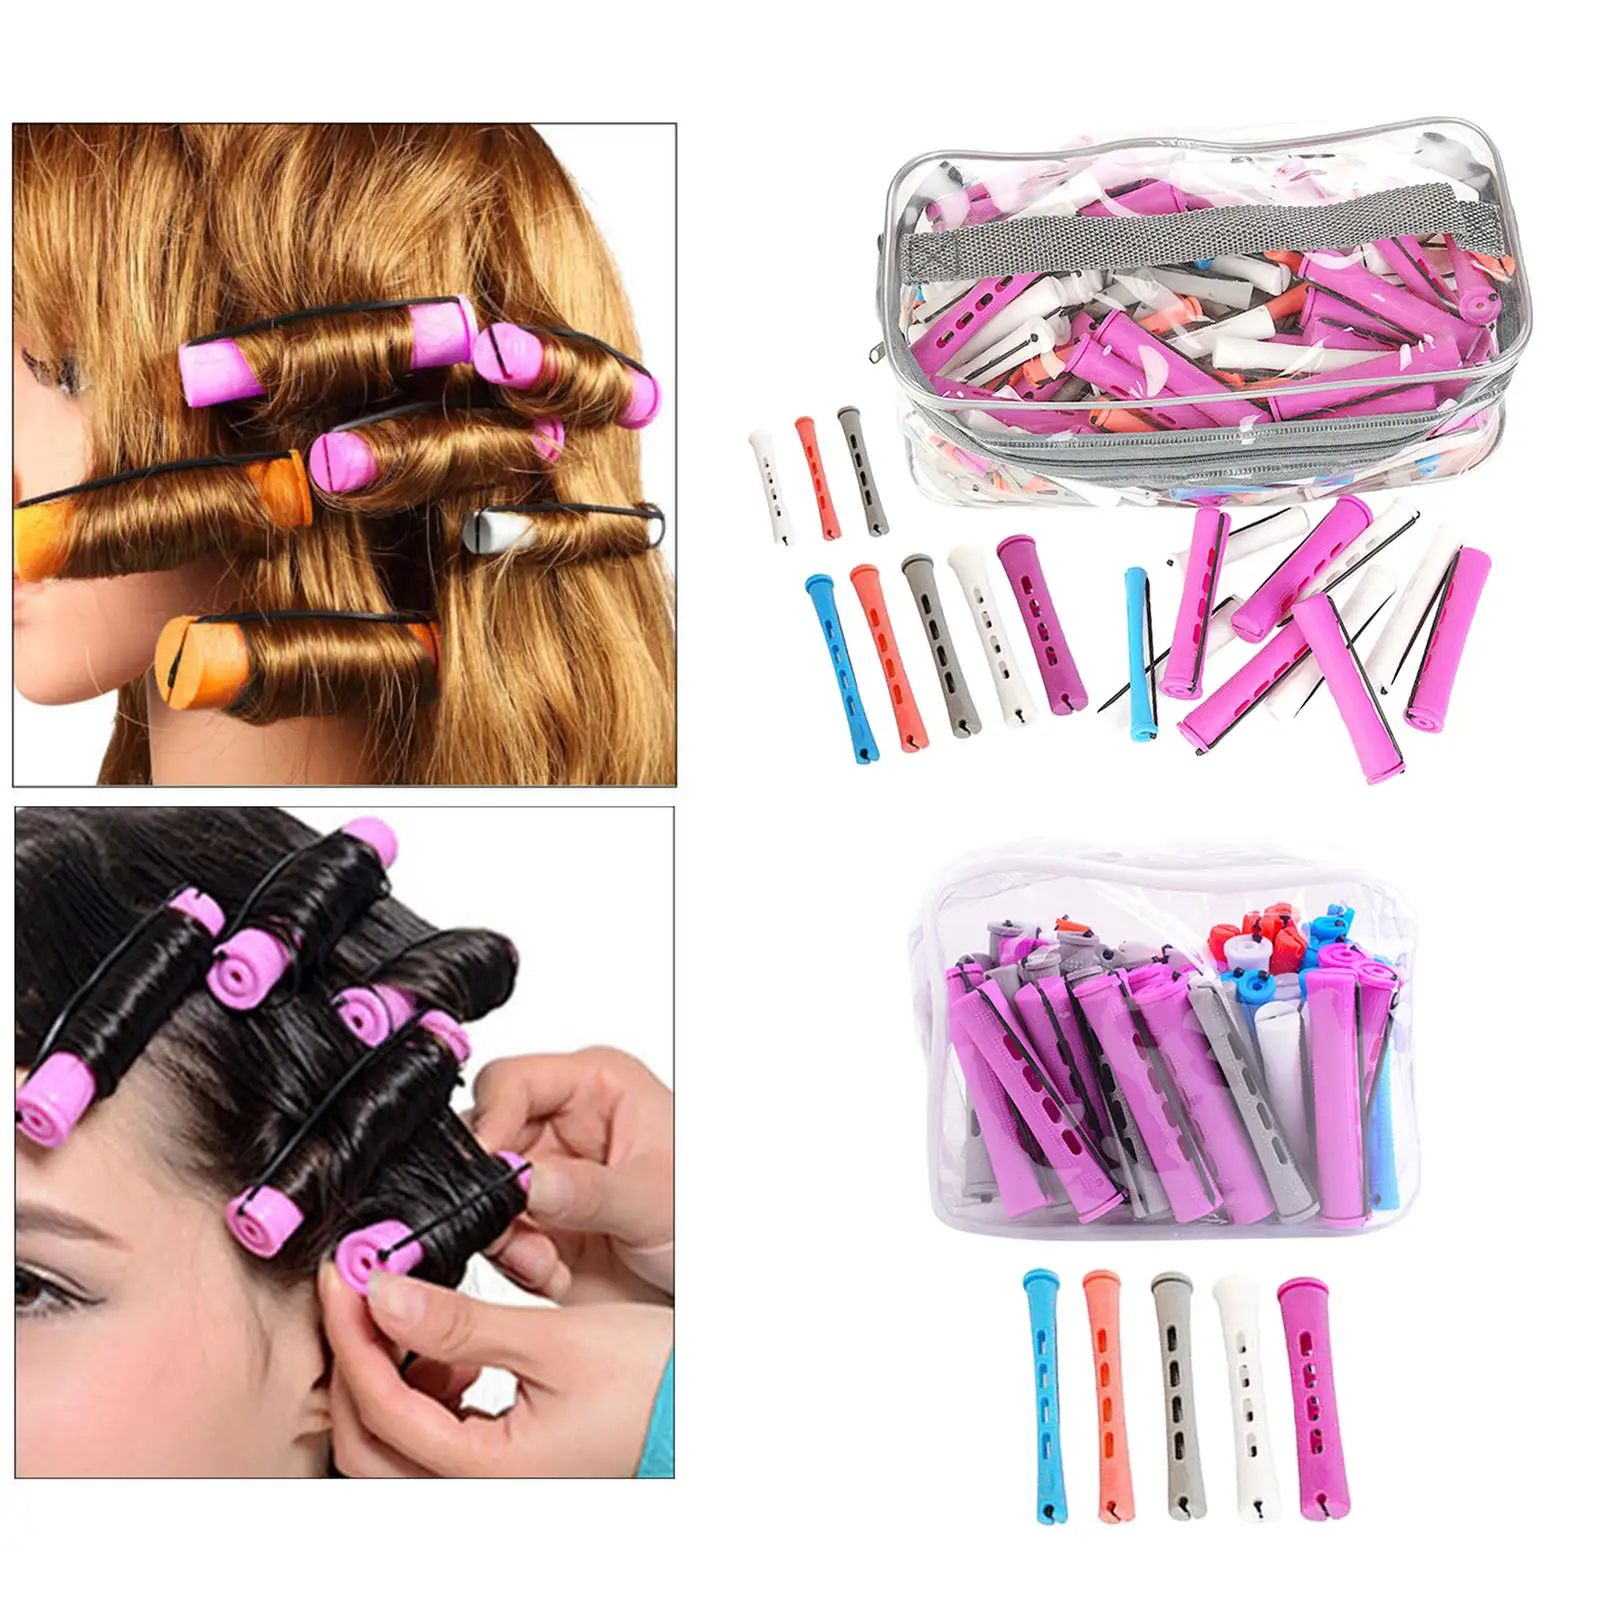 Hair Rollers with Rubber Band Small Medium Large Size No Heat Perm Rods Perming Curlers Curly Wavy Rod for Long Short Hair Set